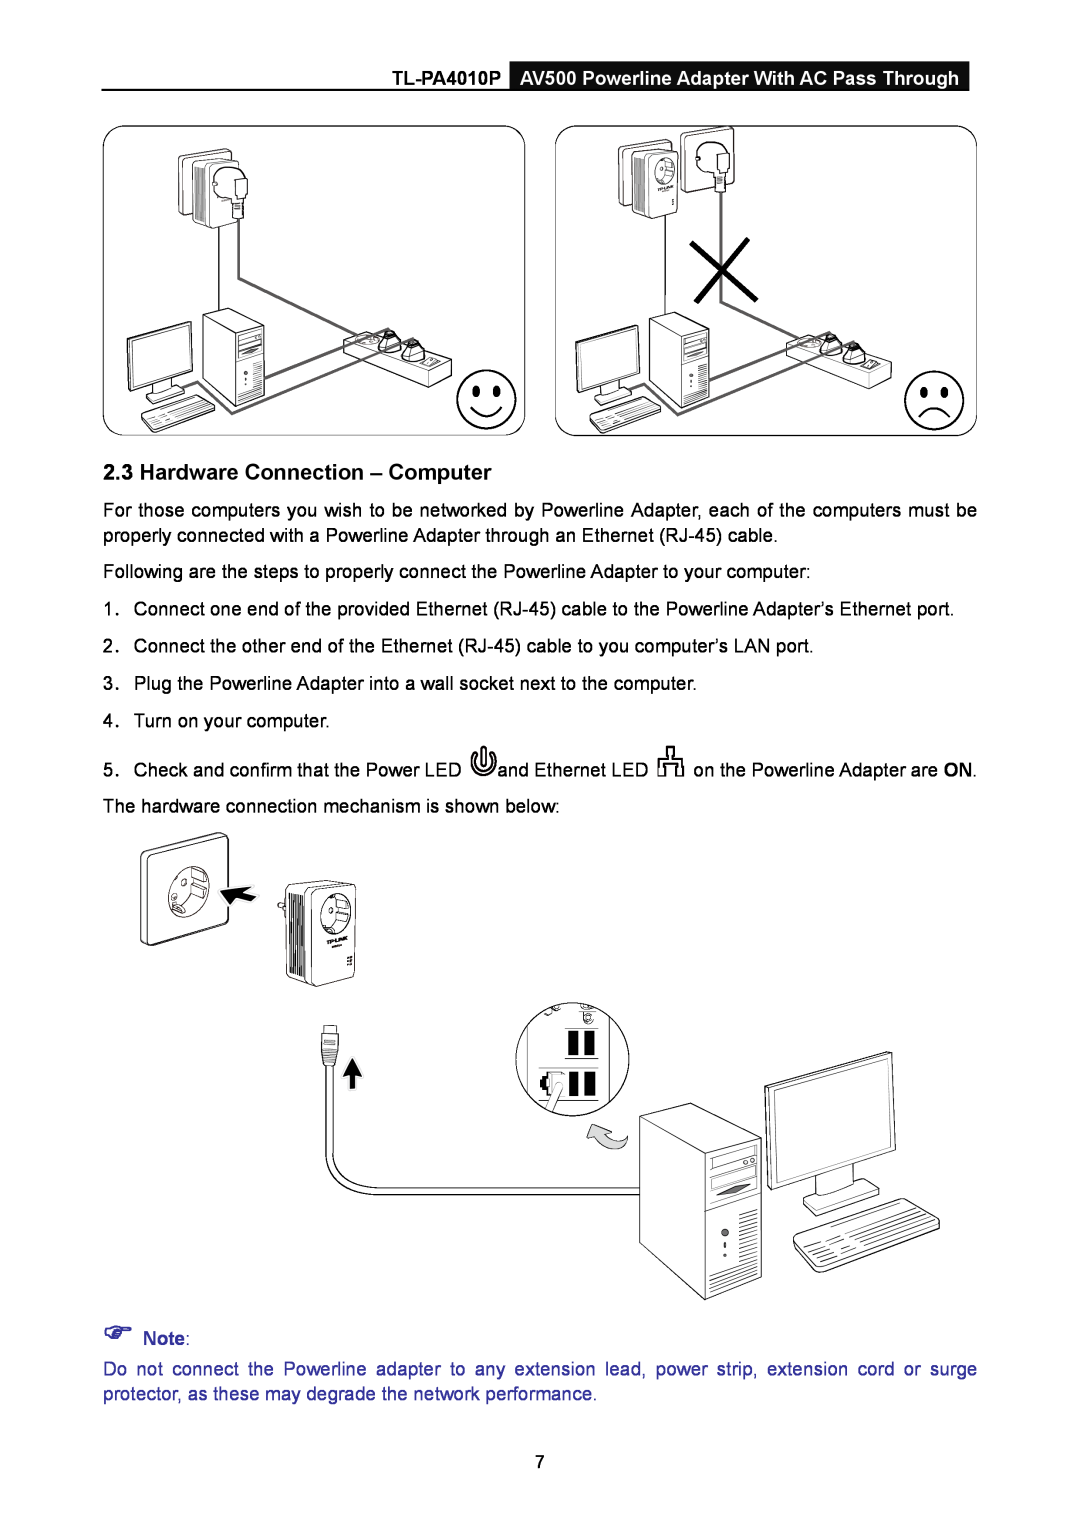 TP-Link manual Hardware Connection - Computer, TL-PA4010P AV500 Powerline Adapter With AC Pass Through,  Note 